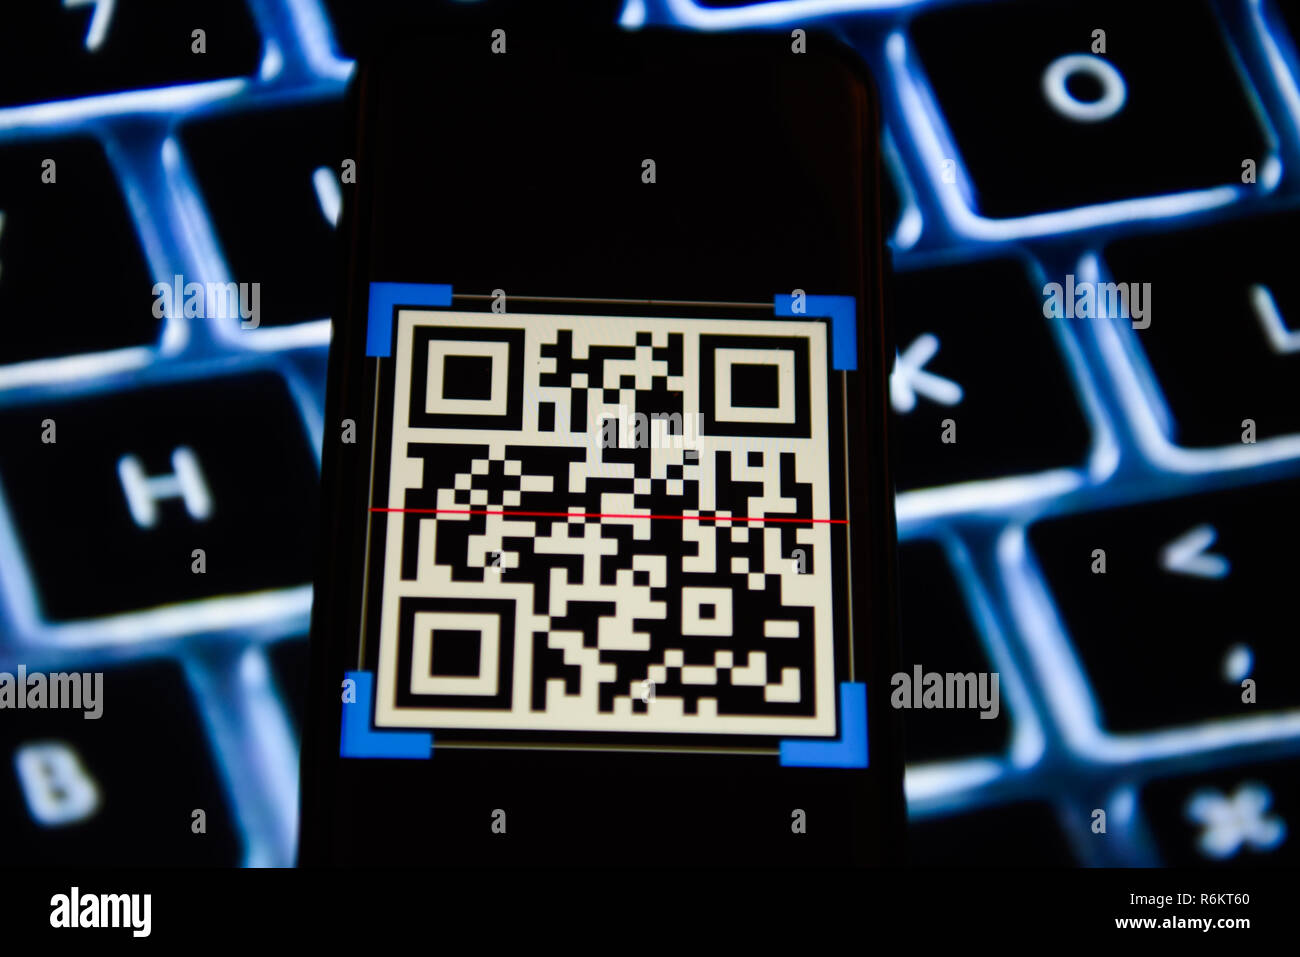 Qr Logo High Resolution Stock Photography and Images - Alamy